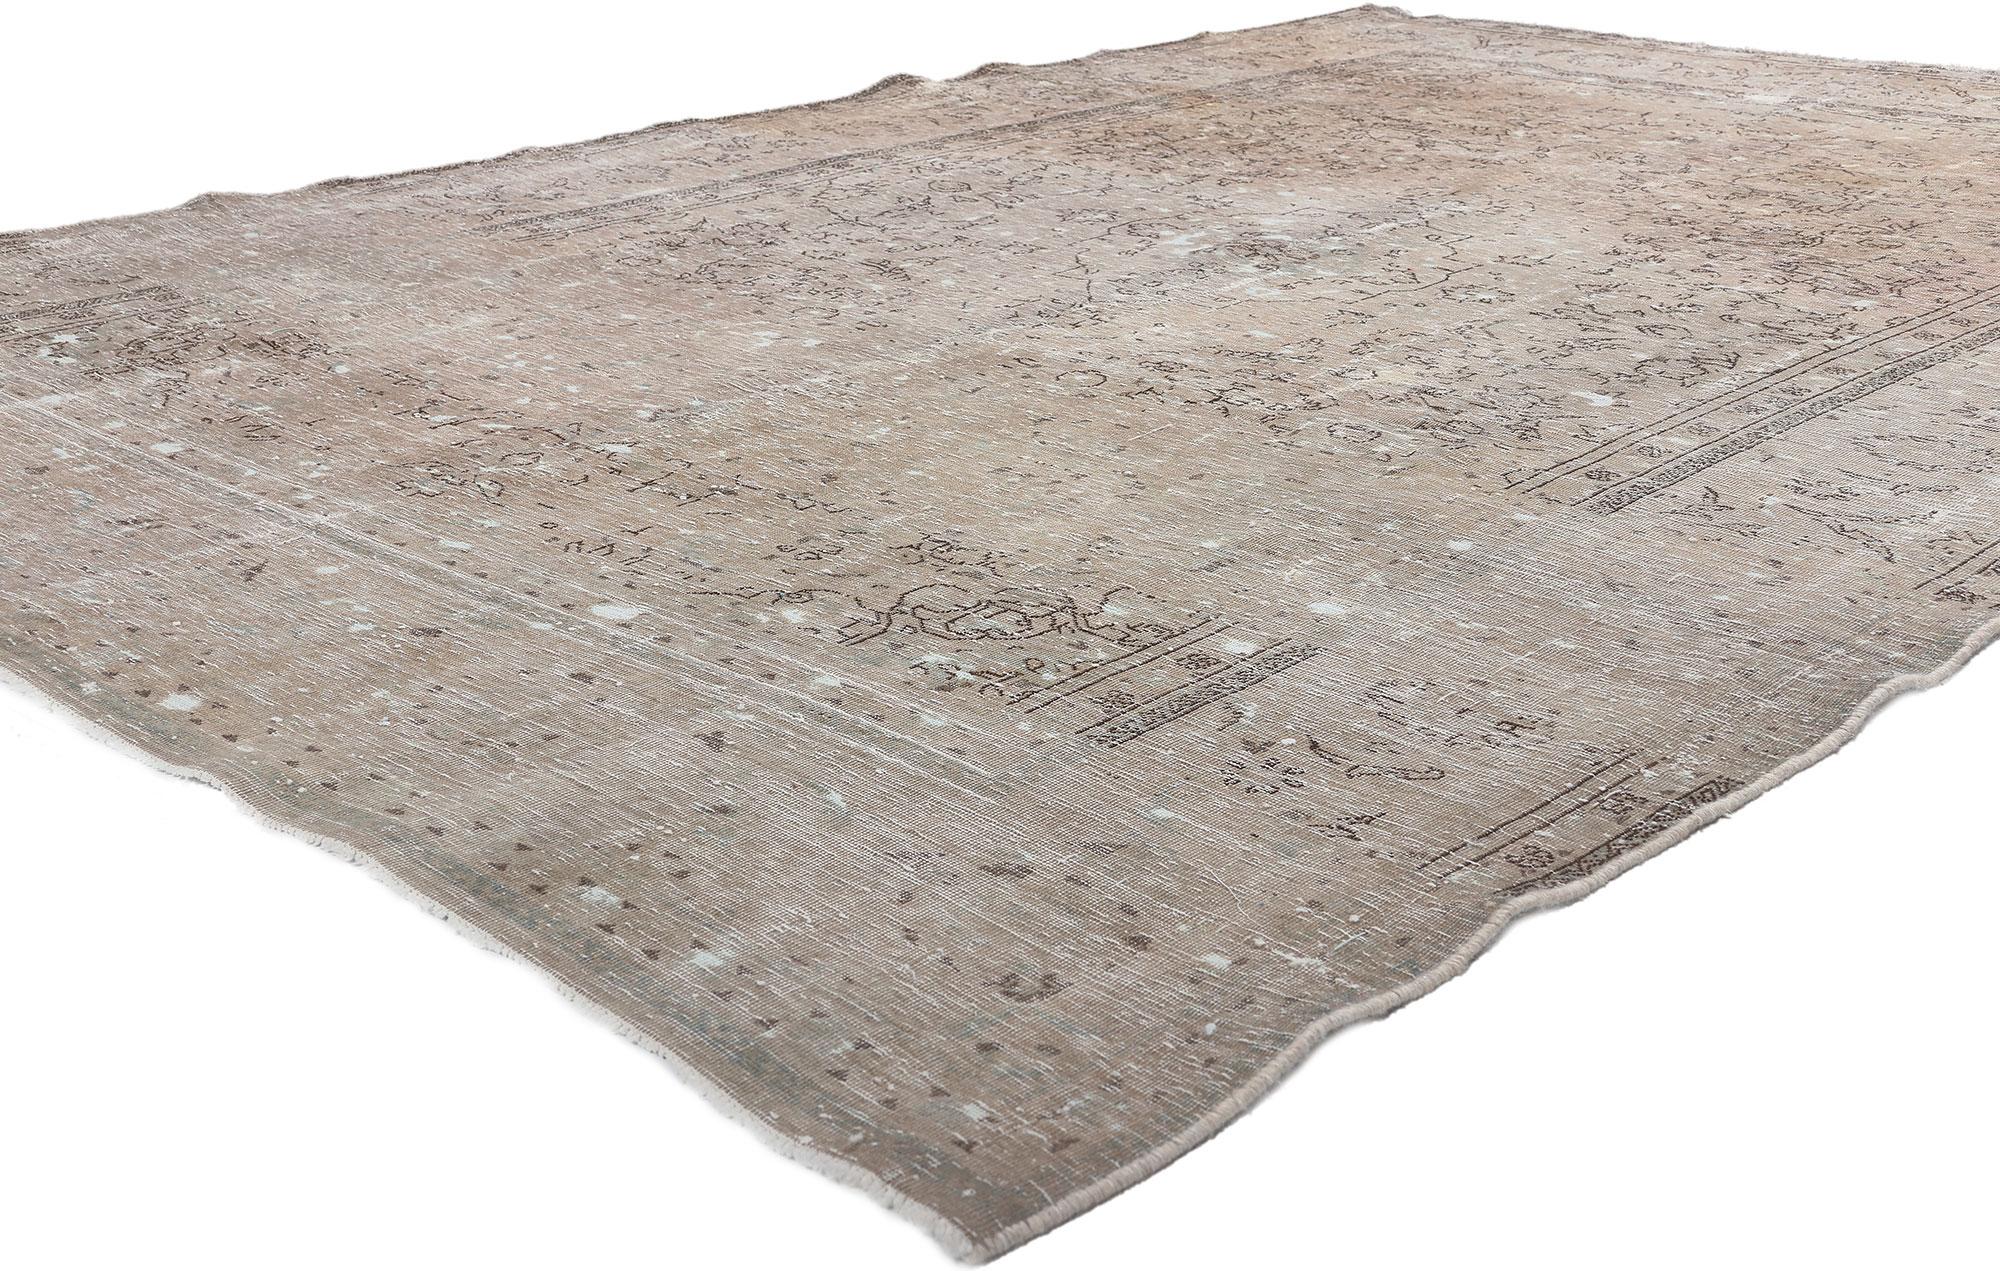 78588 Distressed Vintage Persian Tabriz Rug, 06'04 x 09'07.
Weathered charm meets rustic sensibility in this distressed vintage Persian Tabriz rug. The faded floral pattern and neutral earth-tone colors woven into this piece work together creating